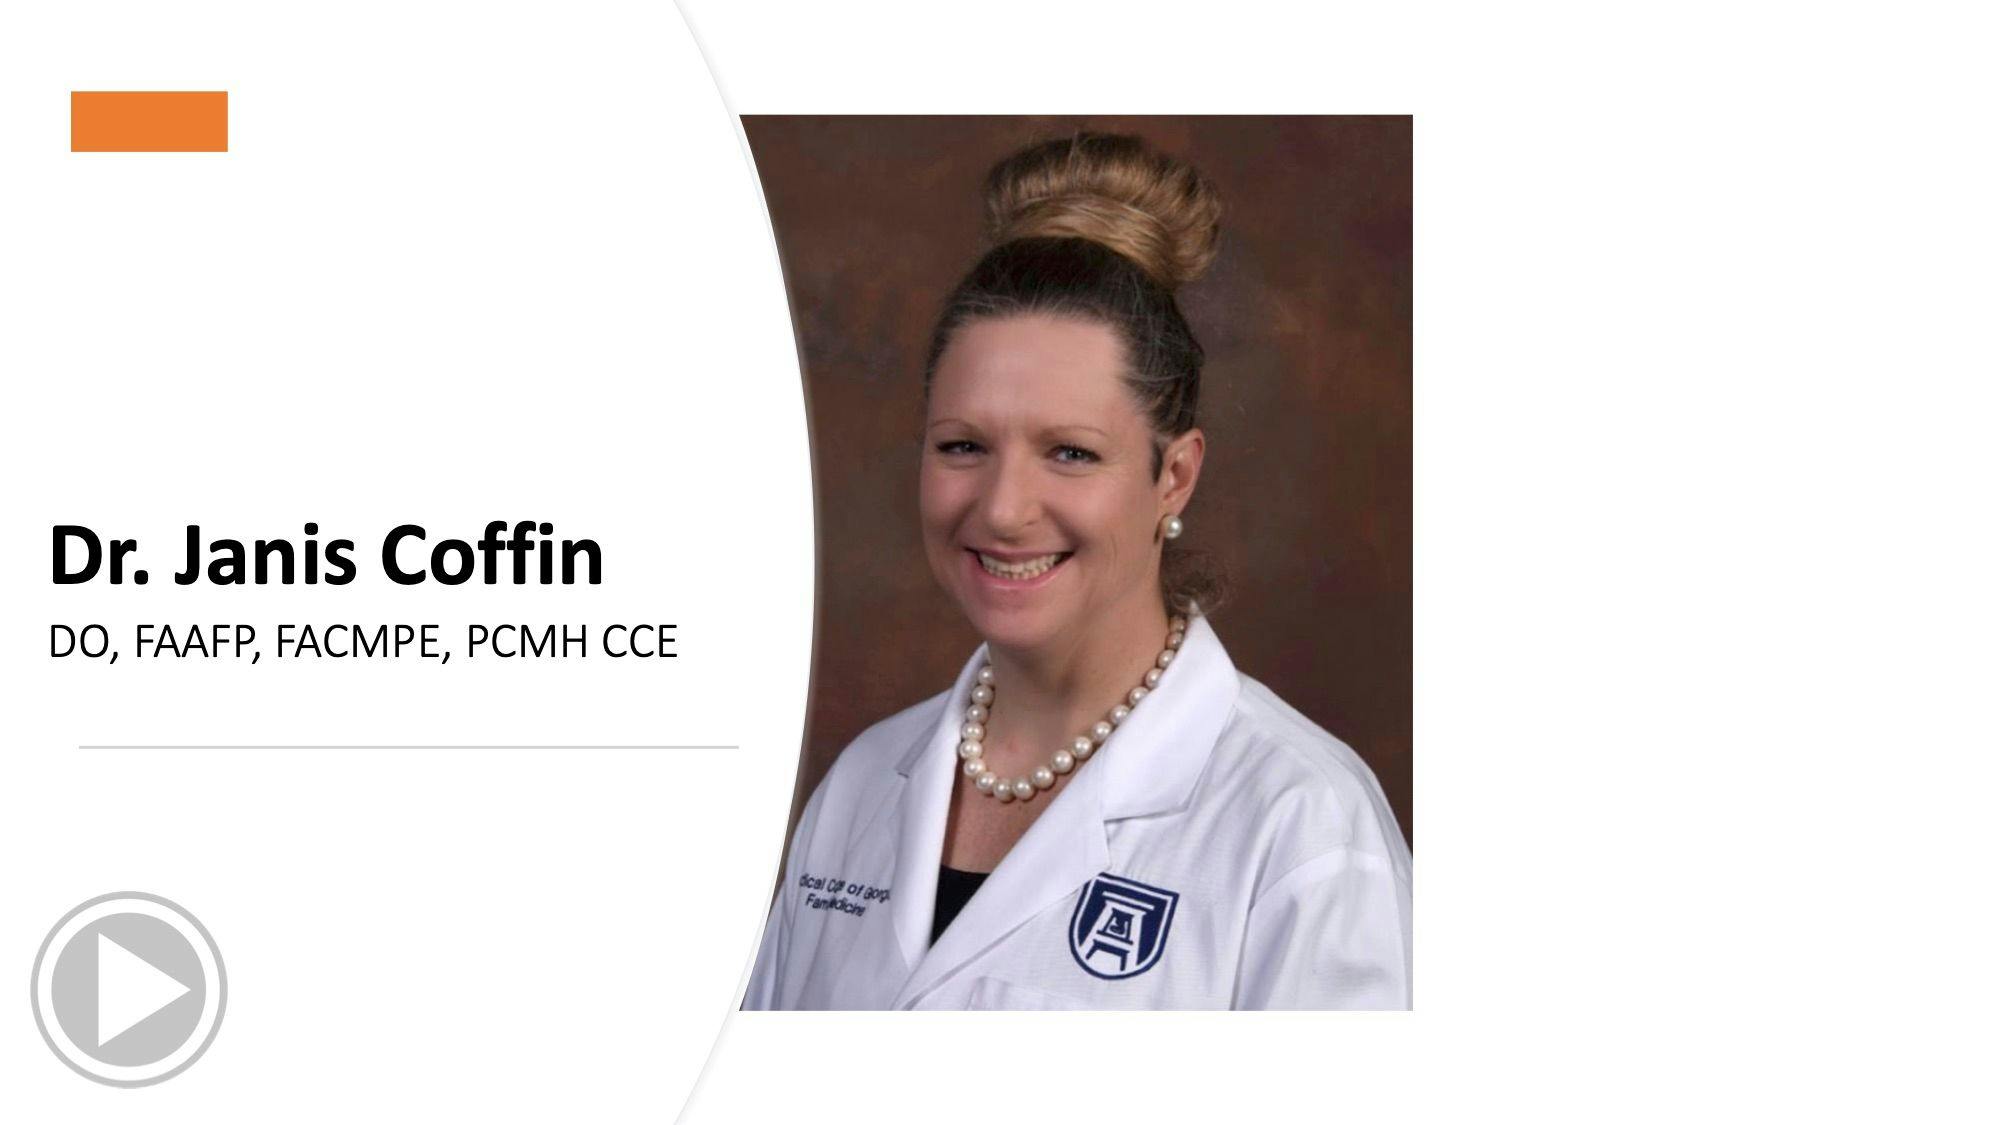 Dr. Janis Coffin gives expert advice